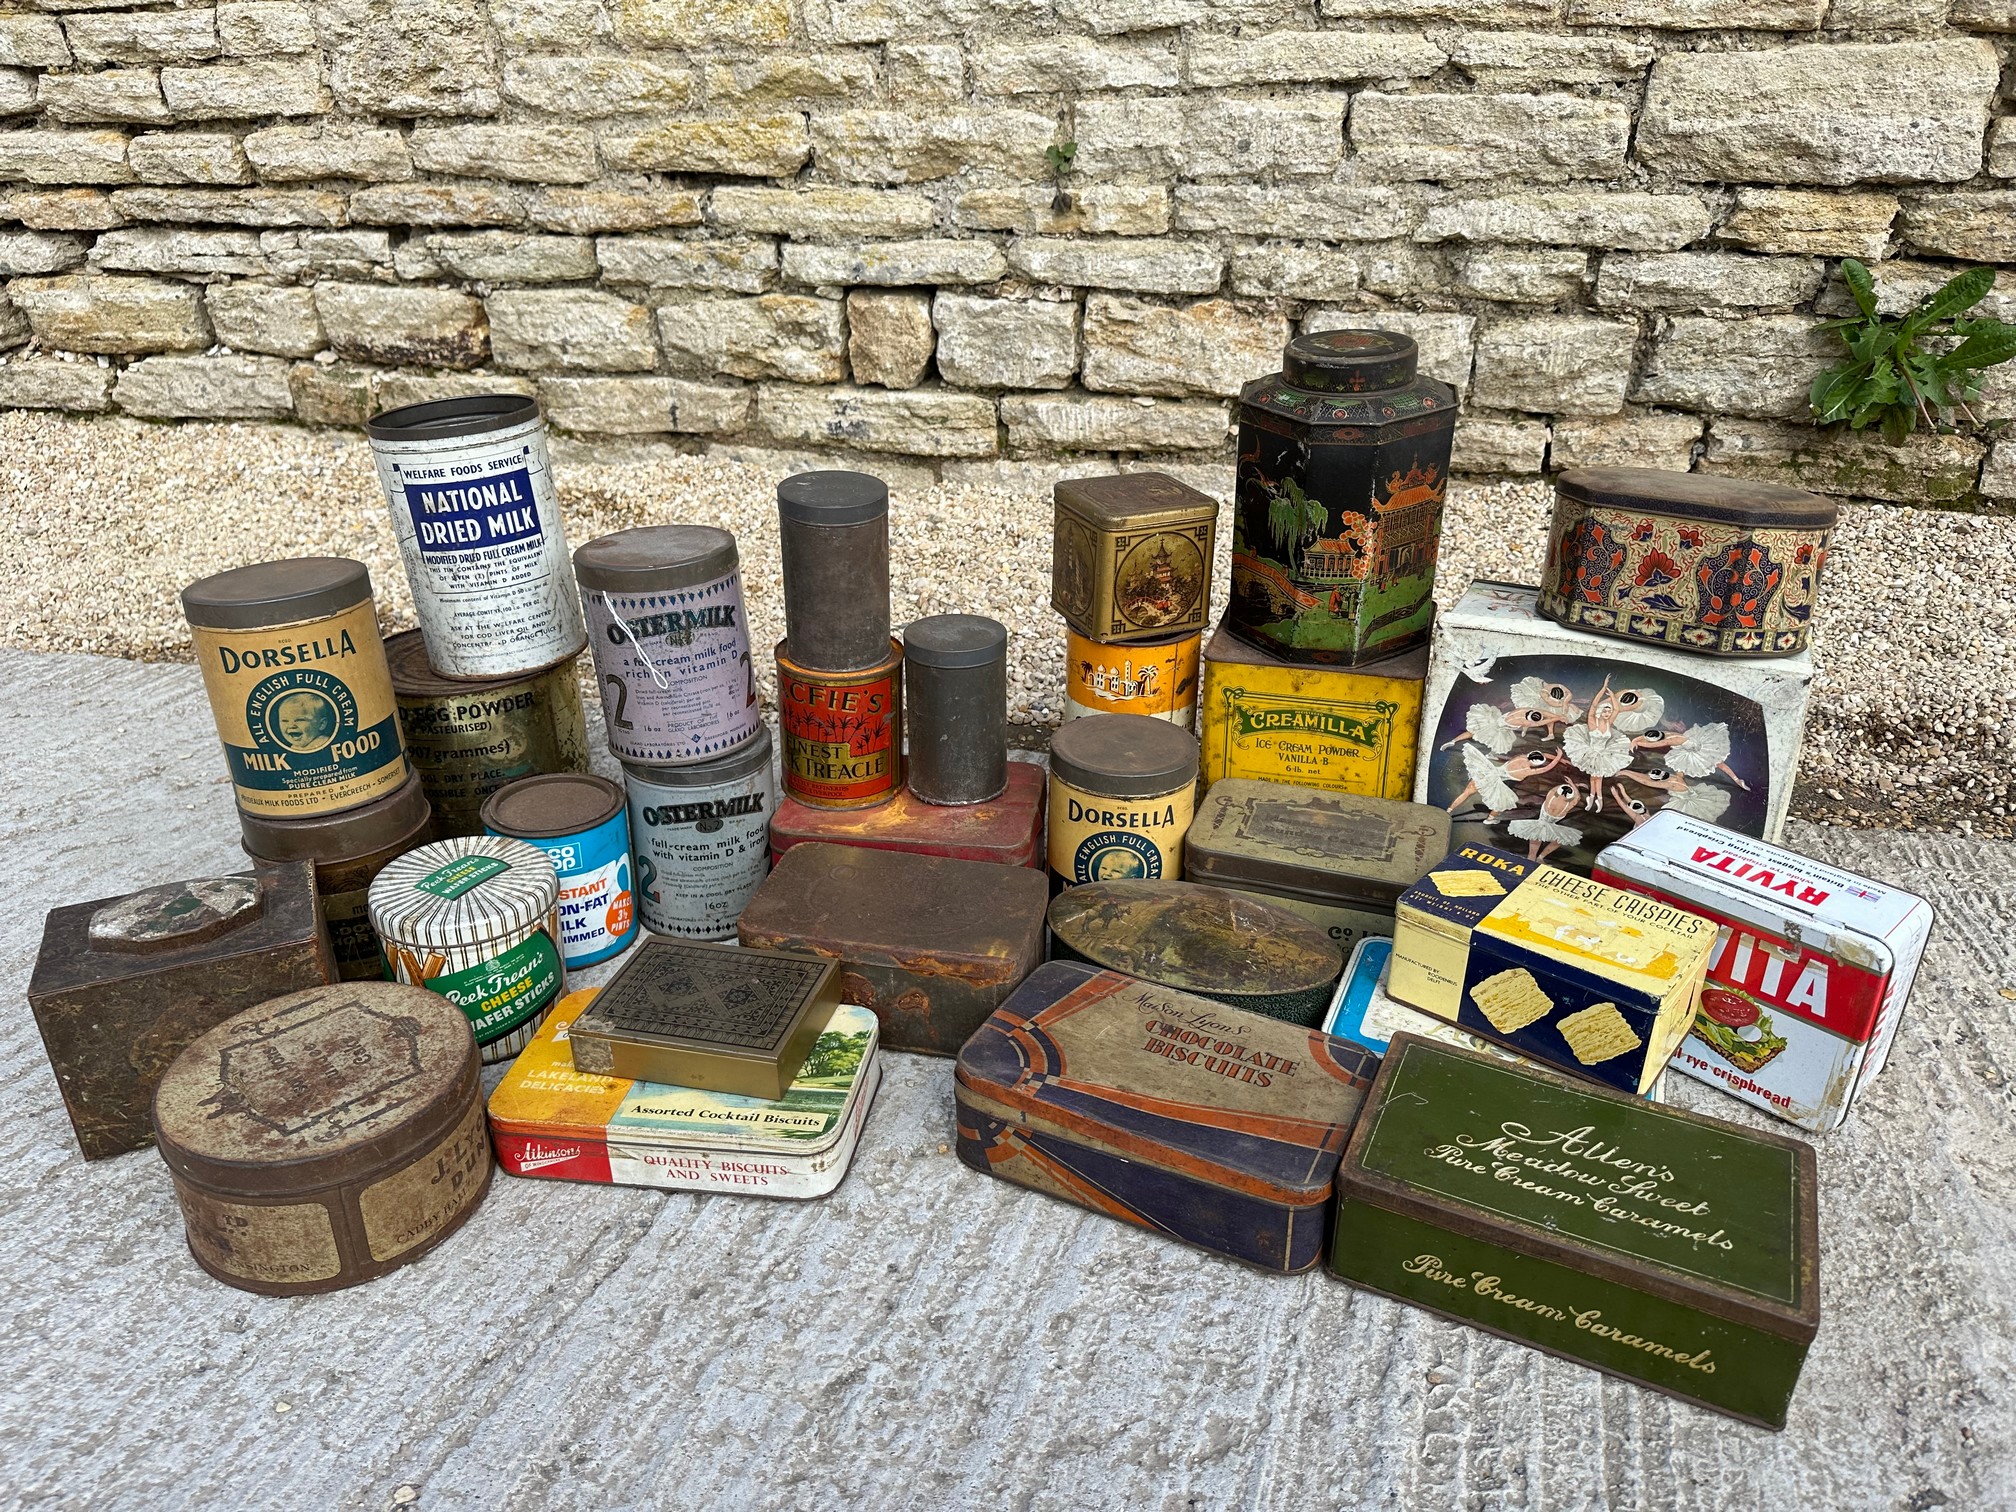 A selection of food tins inc. Maison Lyons, Dorsella, Oster Milk, Peek Frean's Co-op etc.